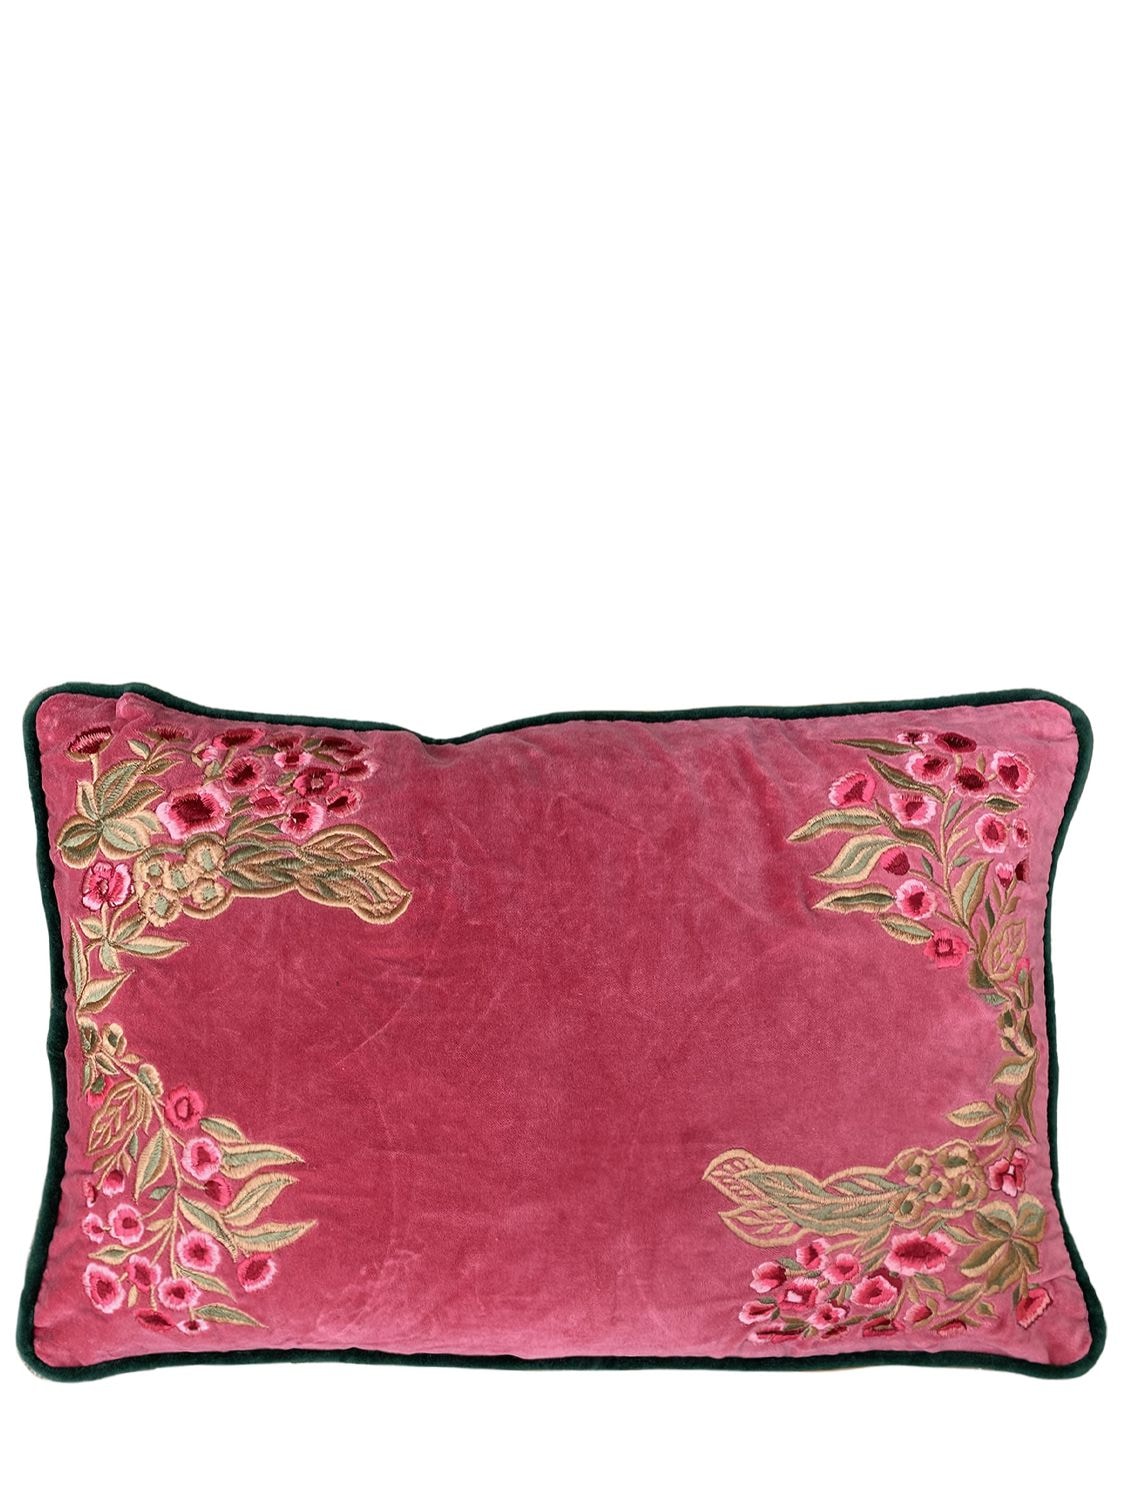 Les Ottomans Embroidered Velvet Cushion In Pink